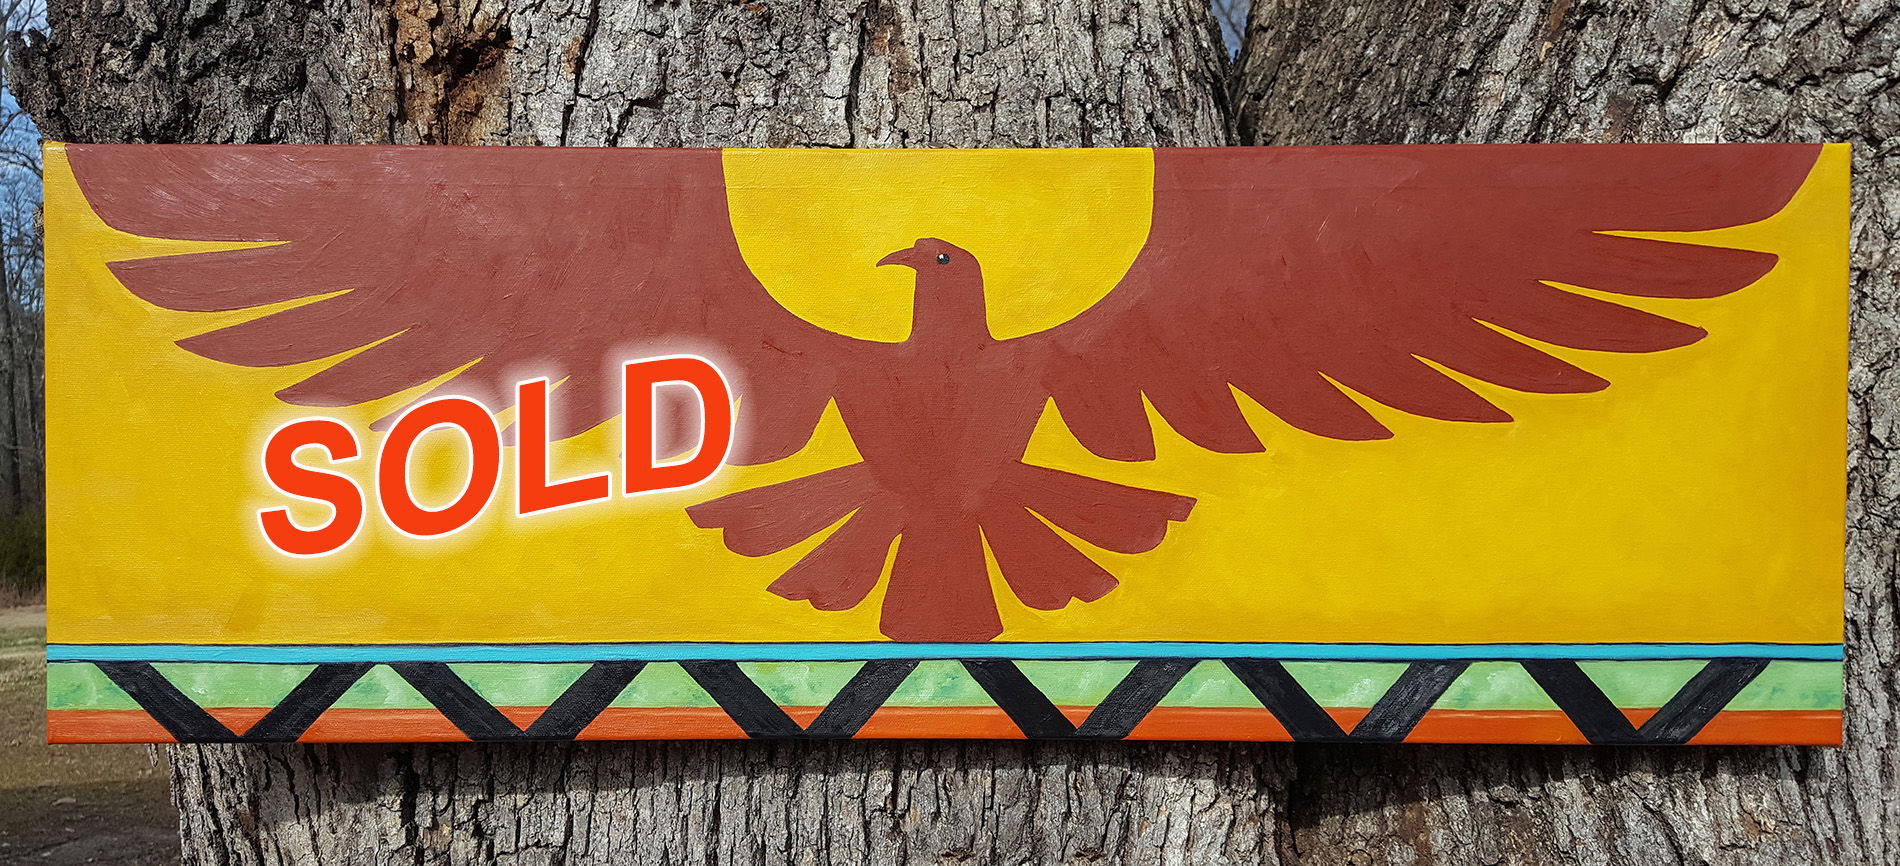 RED EAGLE - AMERICAN INDIAN DESIGNS